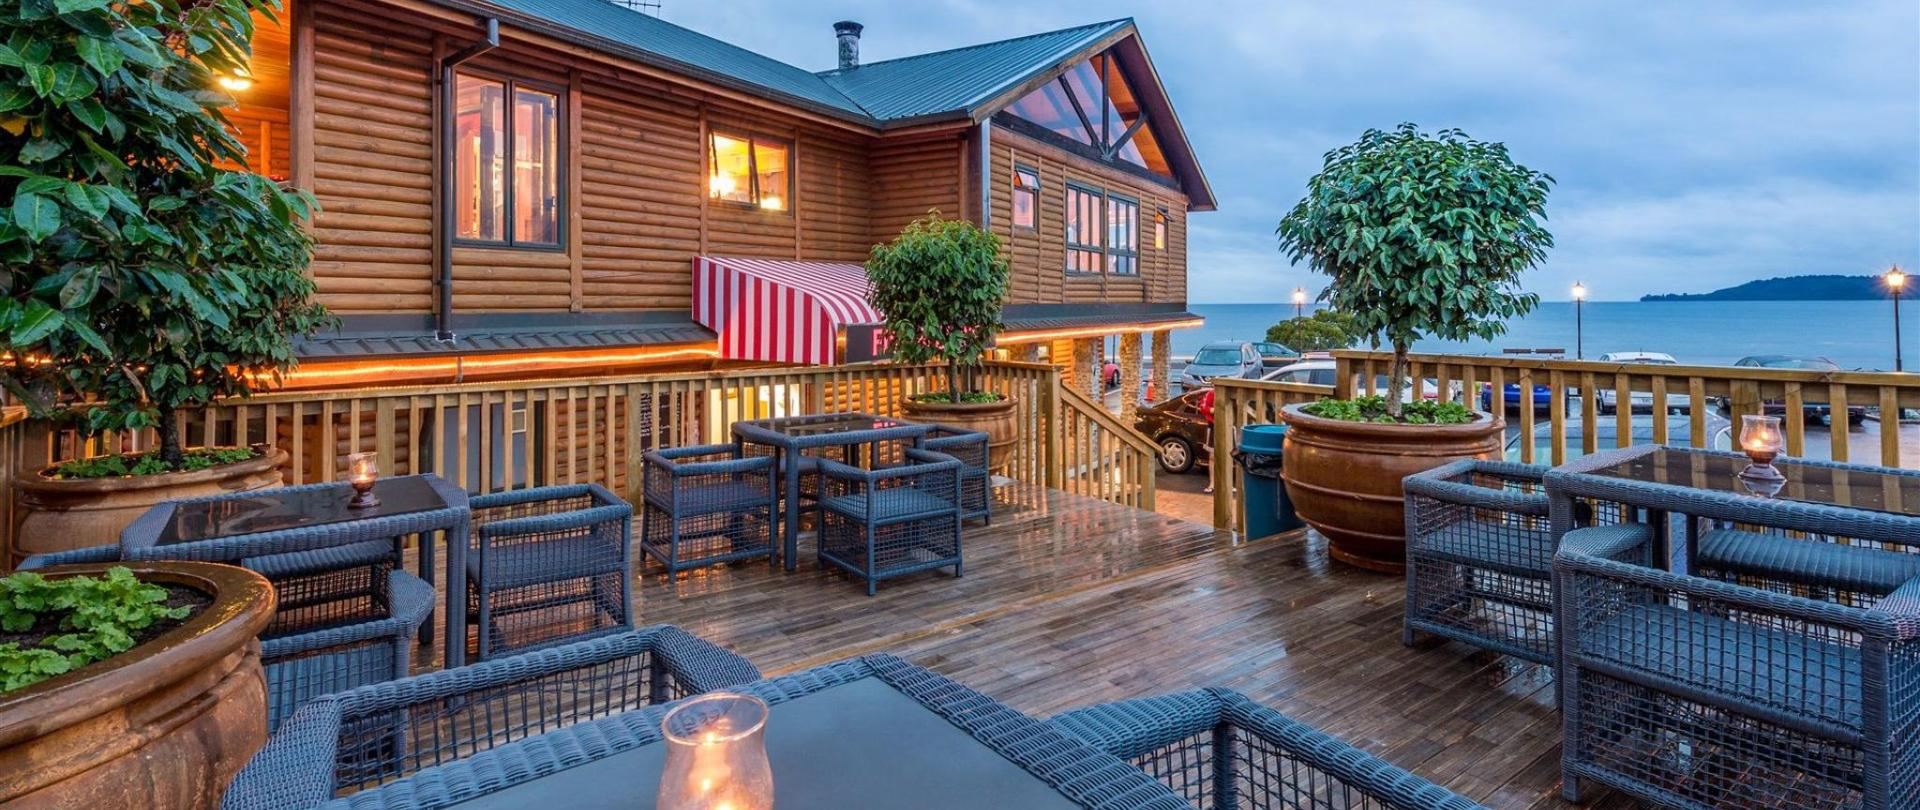 Lakefront Lodge Taupo in Taupo, New Zealand